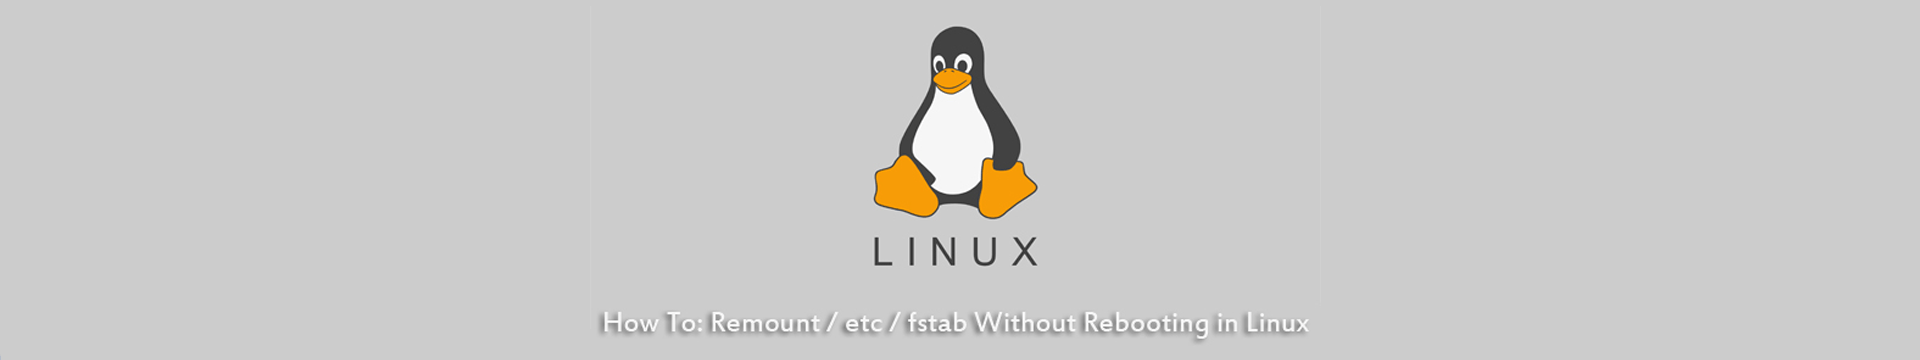 Remount fstab Without Reboot in Linux